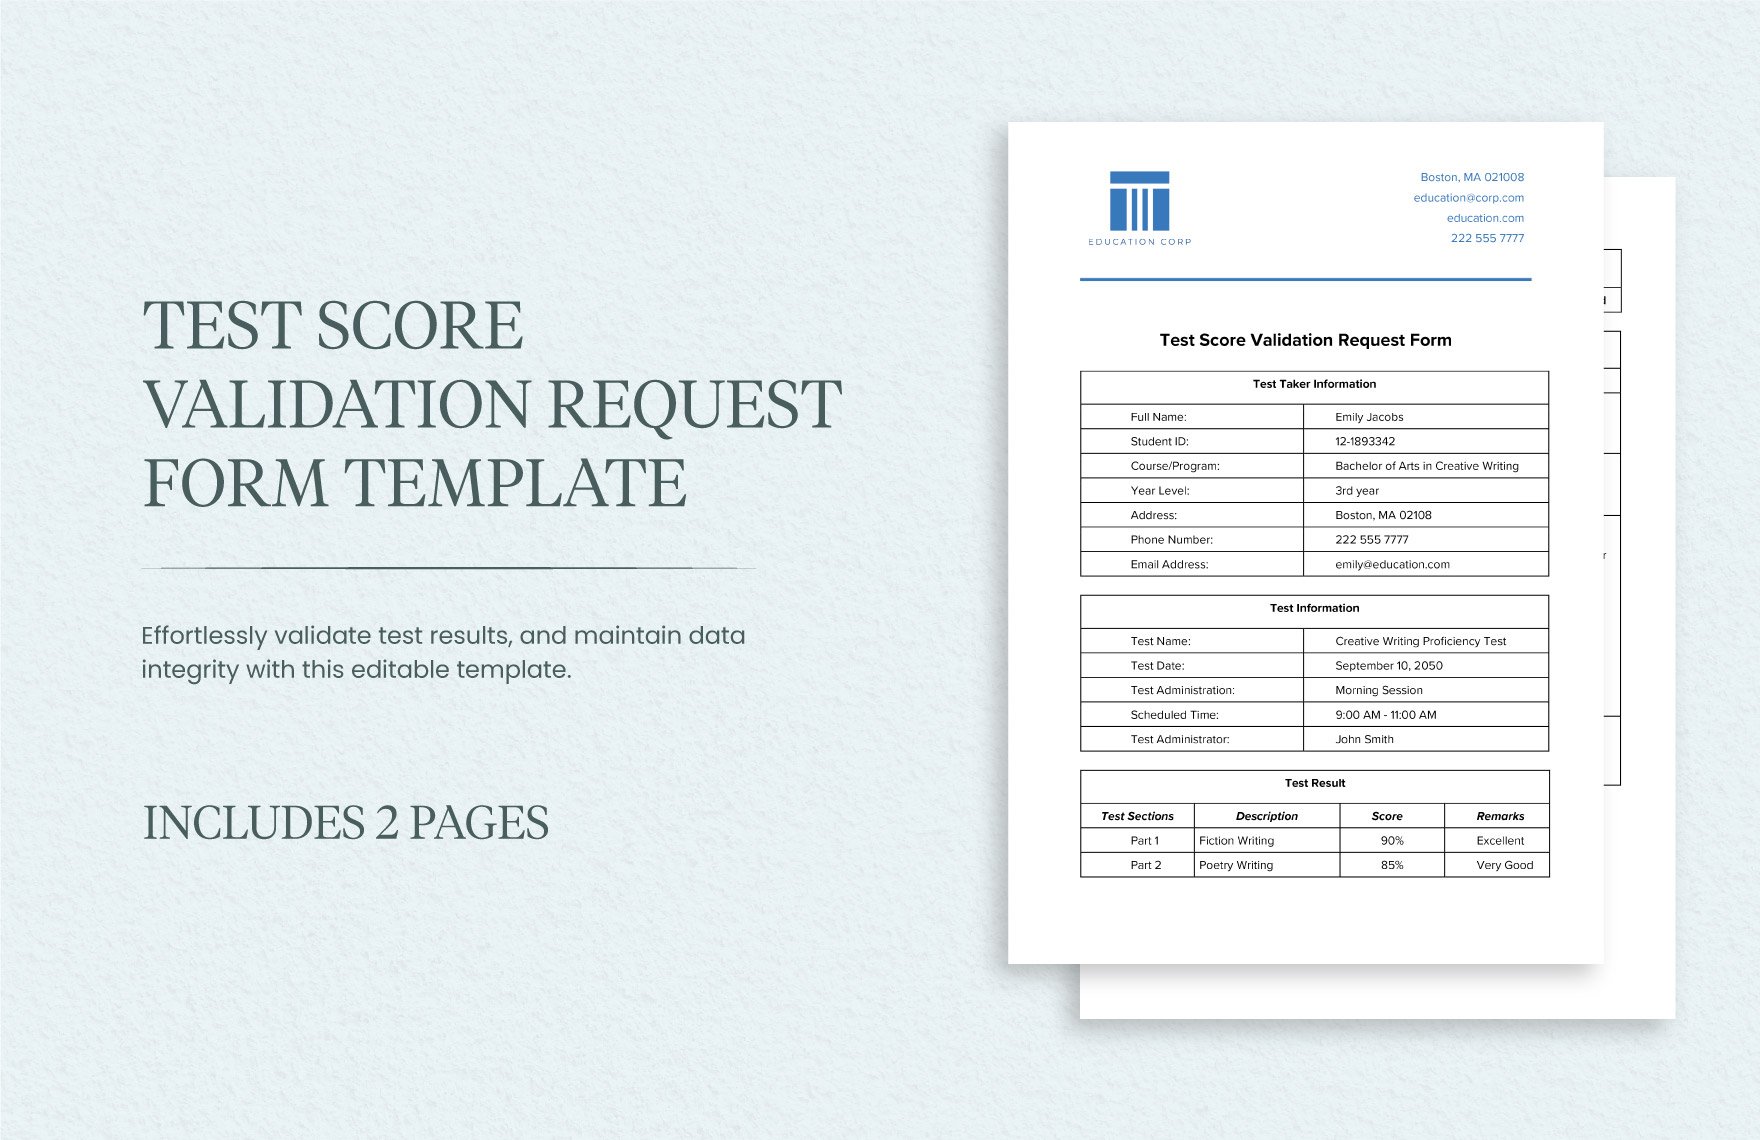 Test Score Validation Request Form Template in Word, Google Docs, PDF